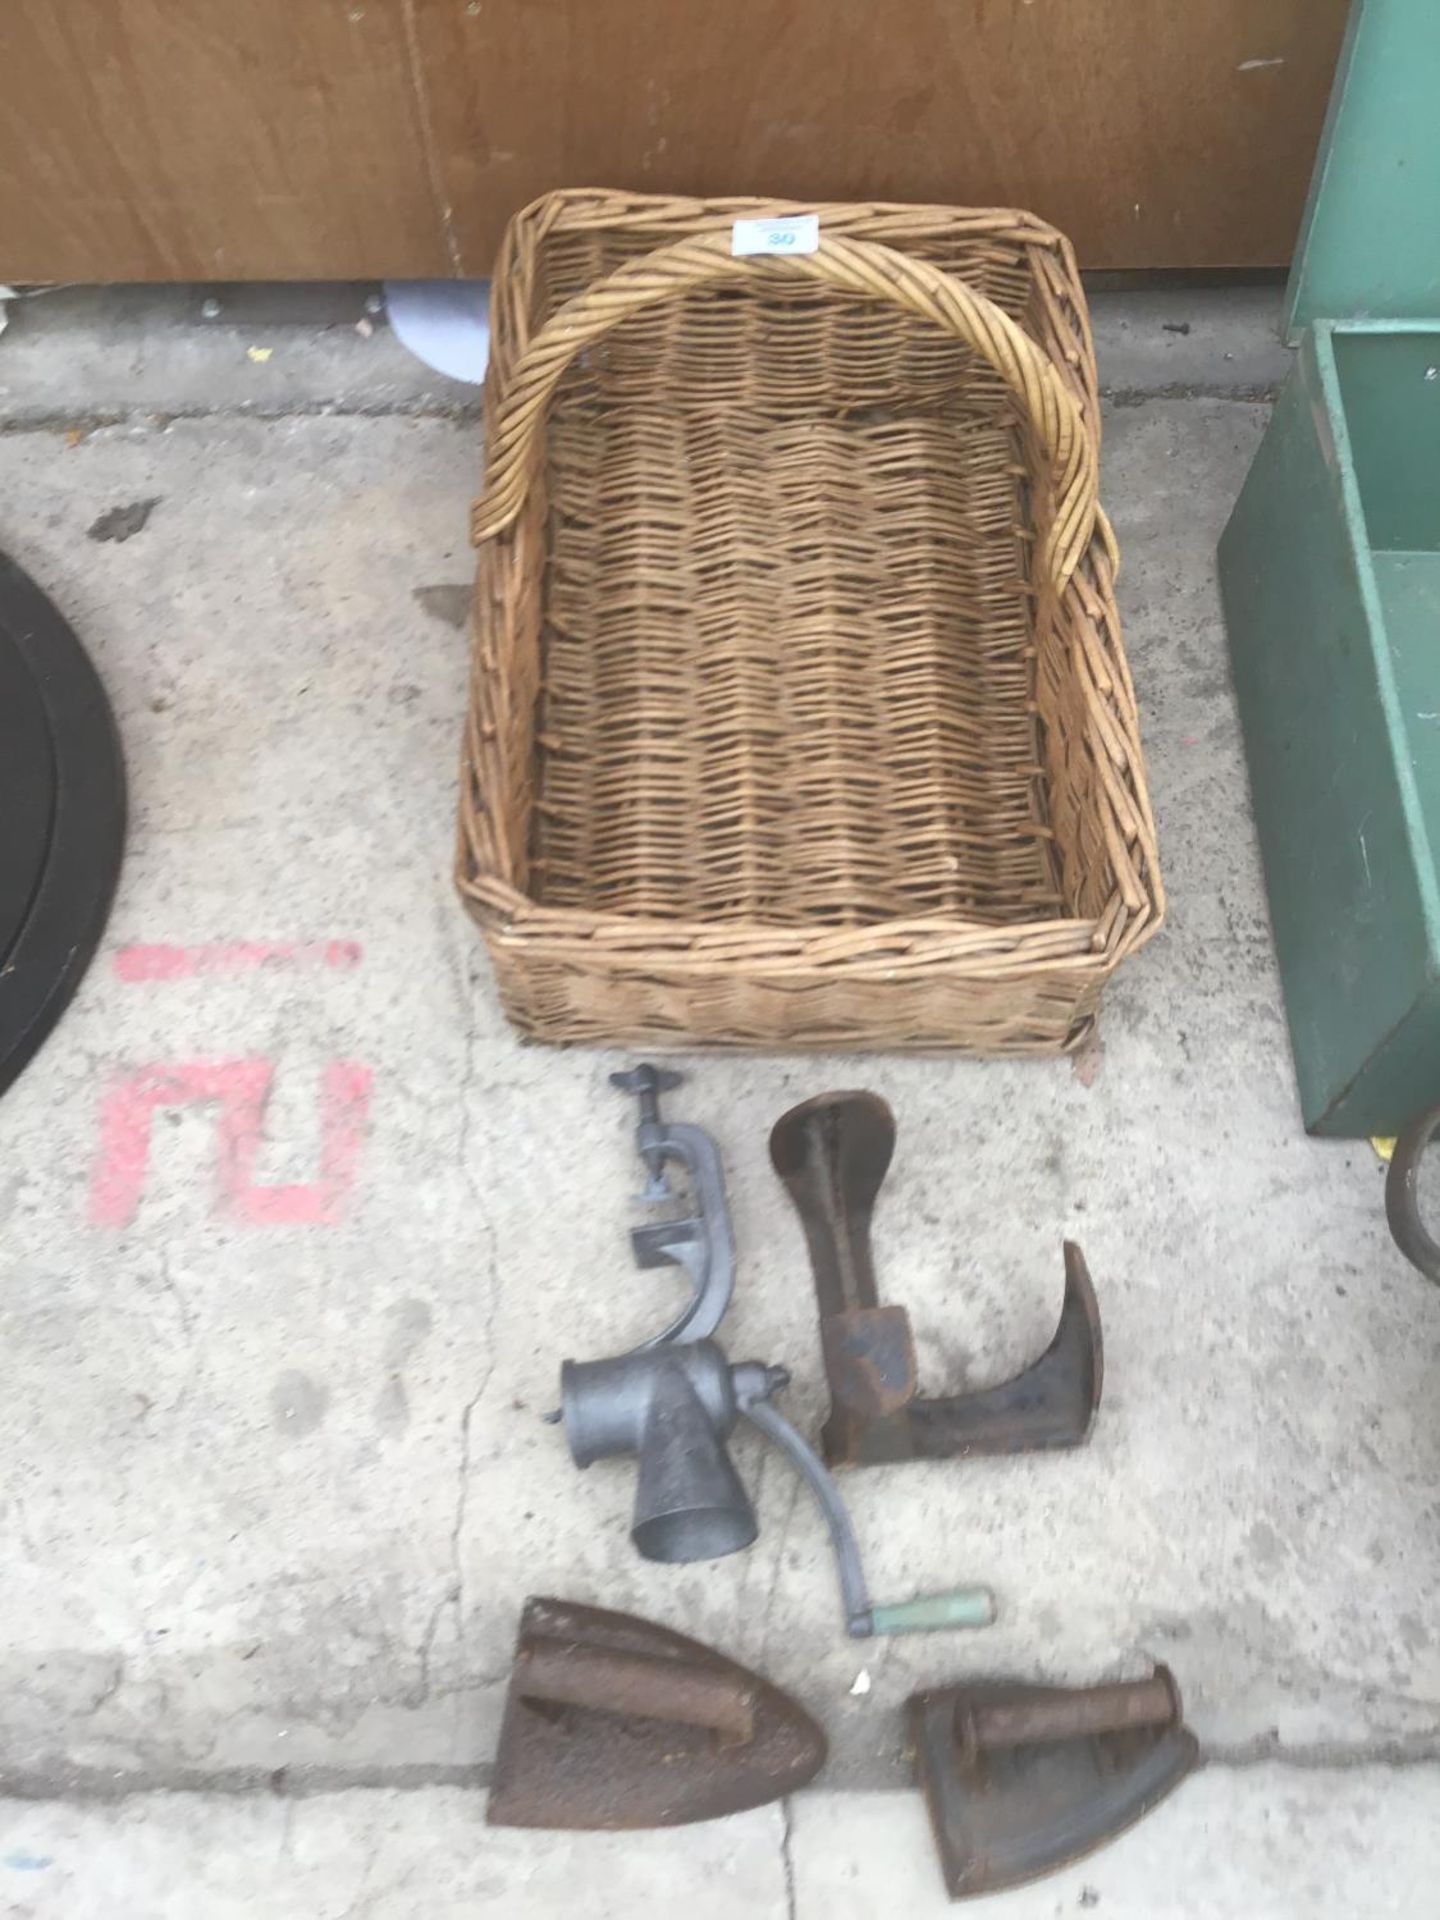 A VINTAGE WICKER PICNIC BASKET,TWO IRONS,A SHOE LAST AND A MINCER